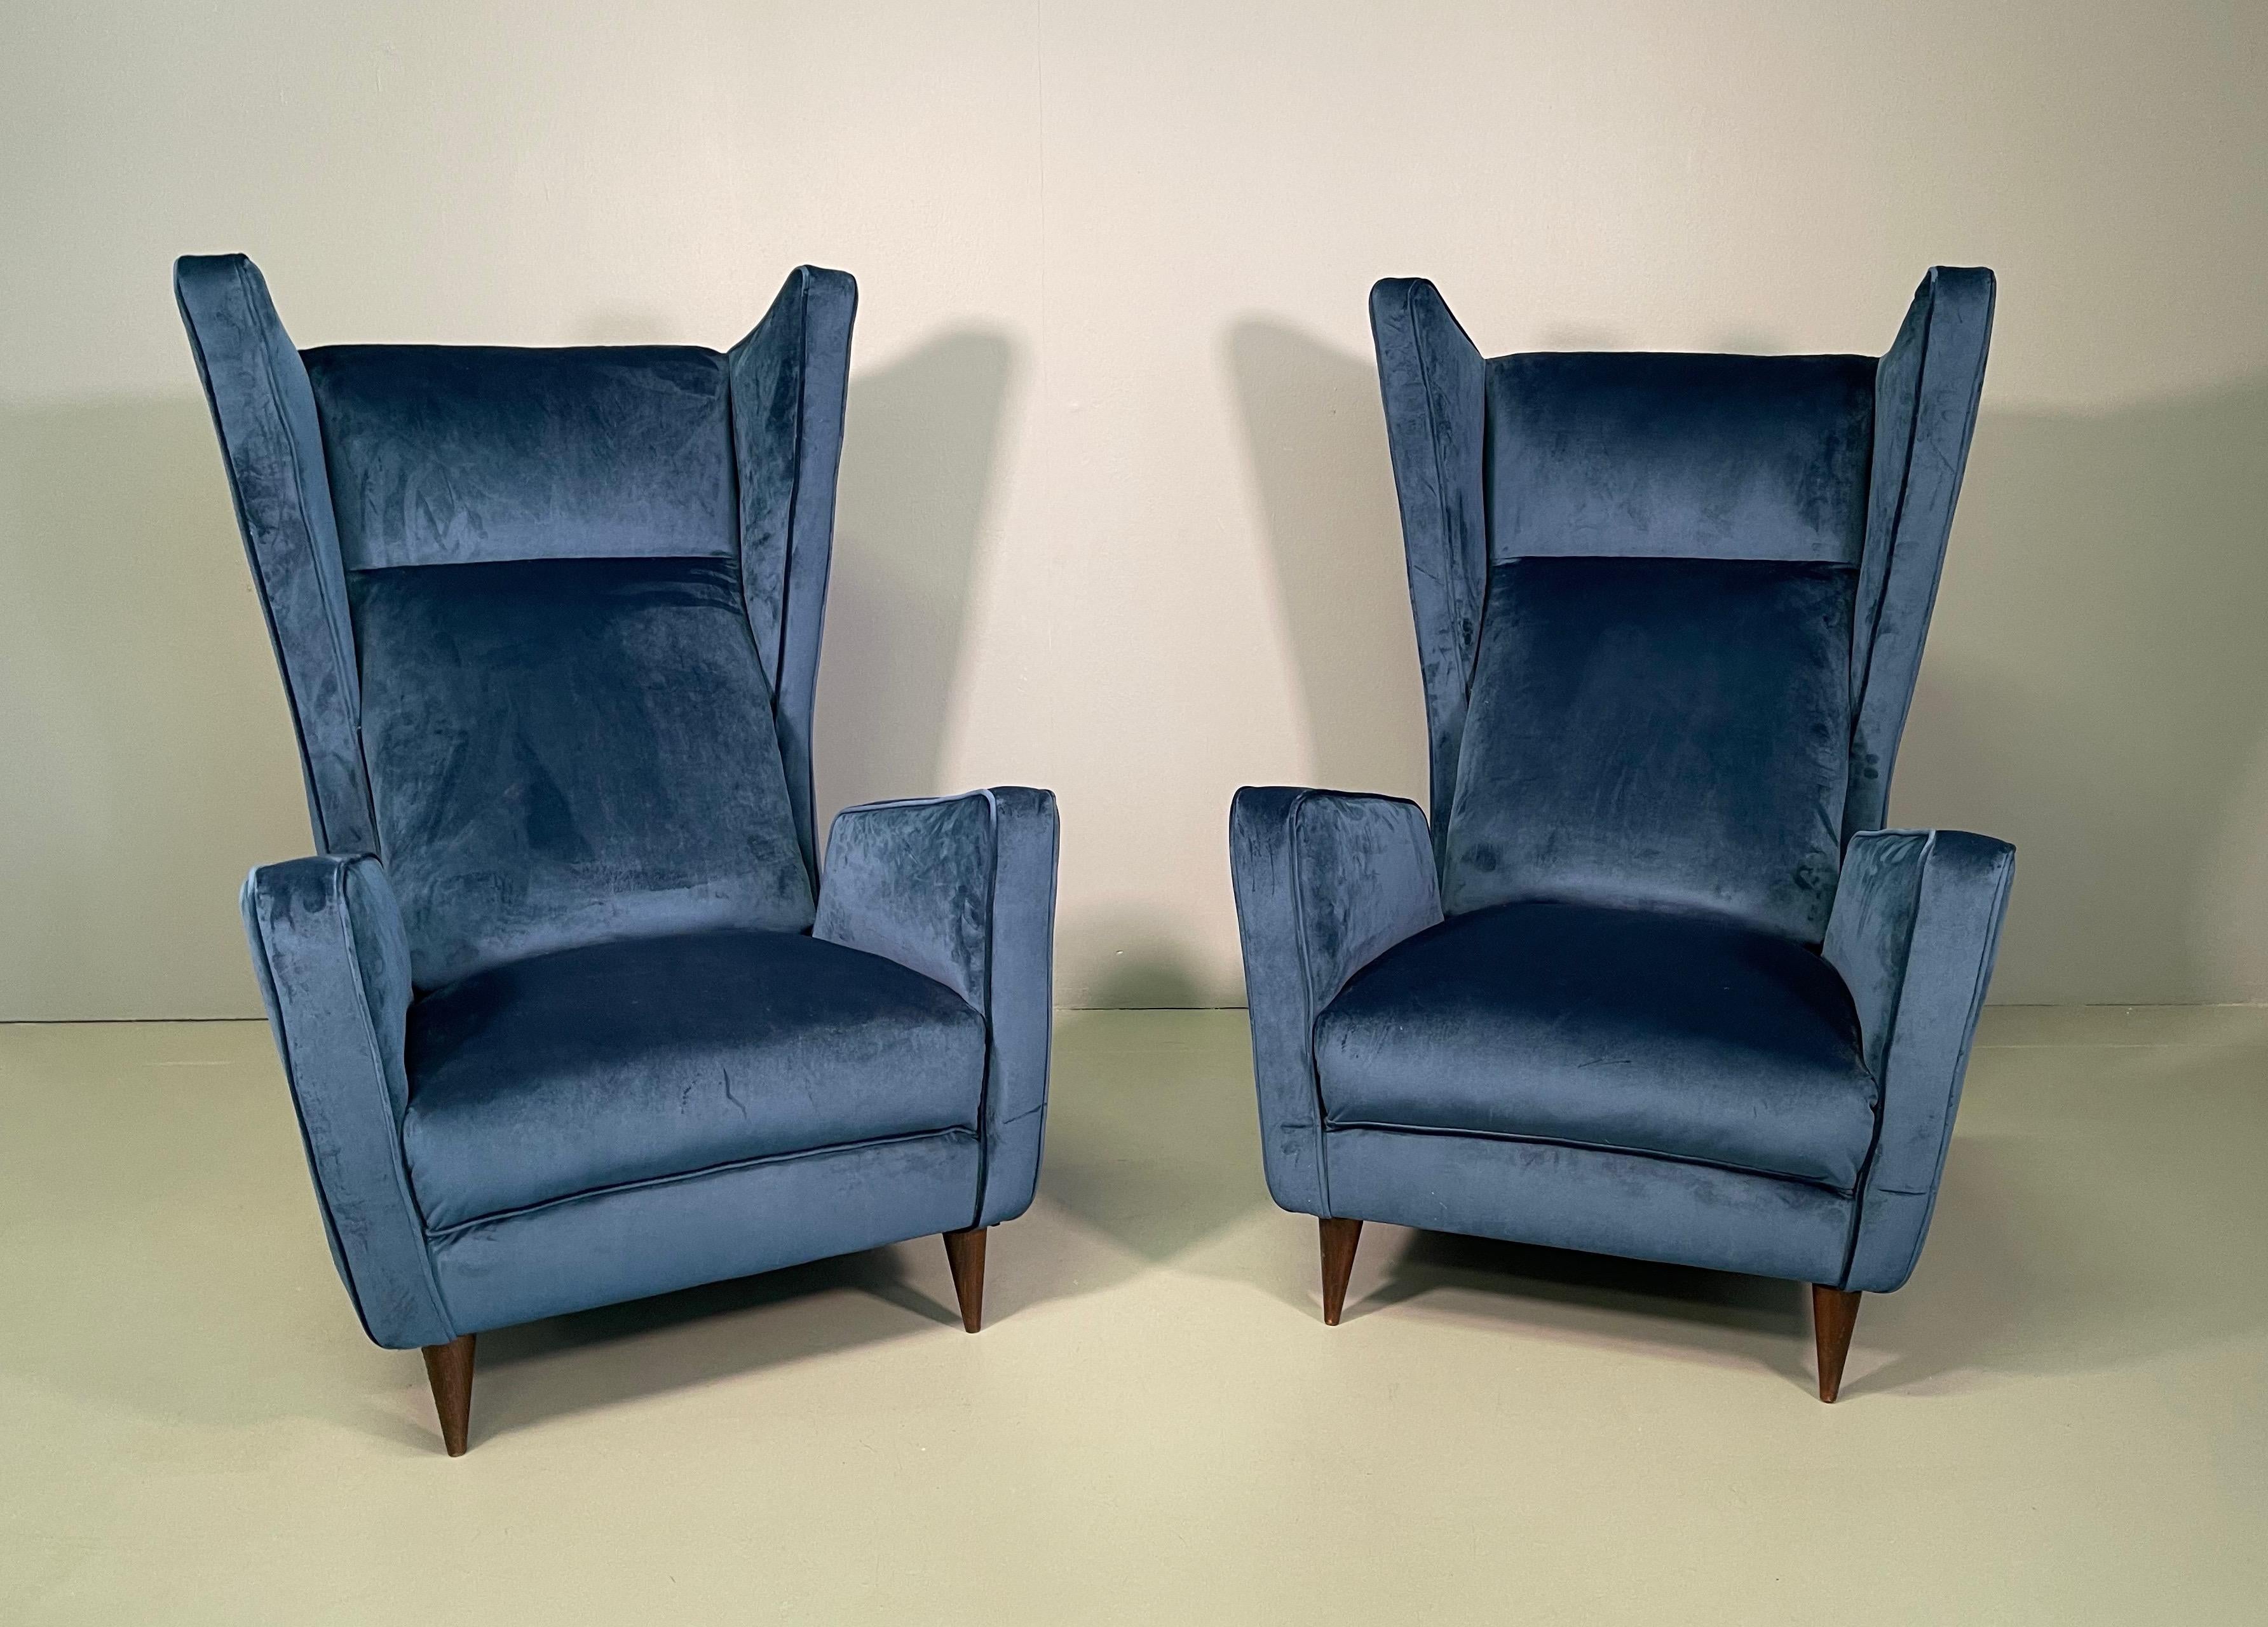 Attractive pair of armchairs designed by architect Mario Oreglia in late 1949. The armchairs present an iconic geometric play where a seductive, vibrant line is exalted, where balance of form and rigorous lines meet to create a sculptural seat. The